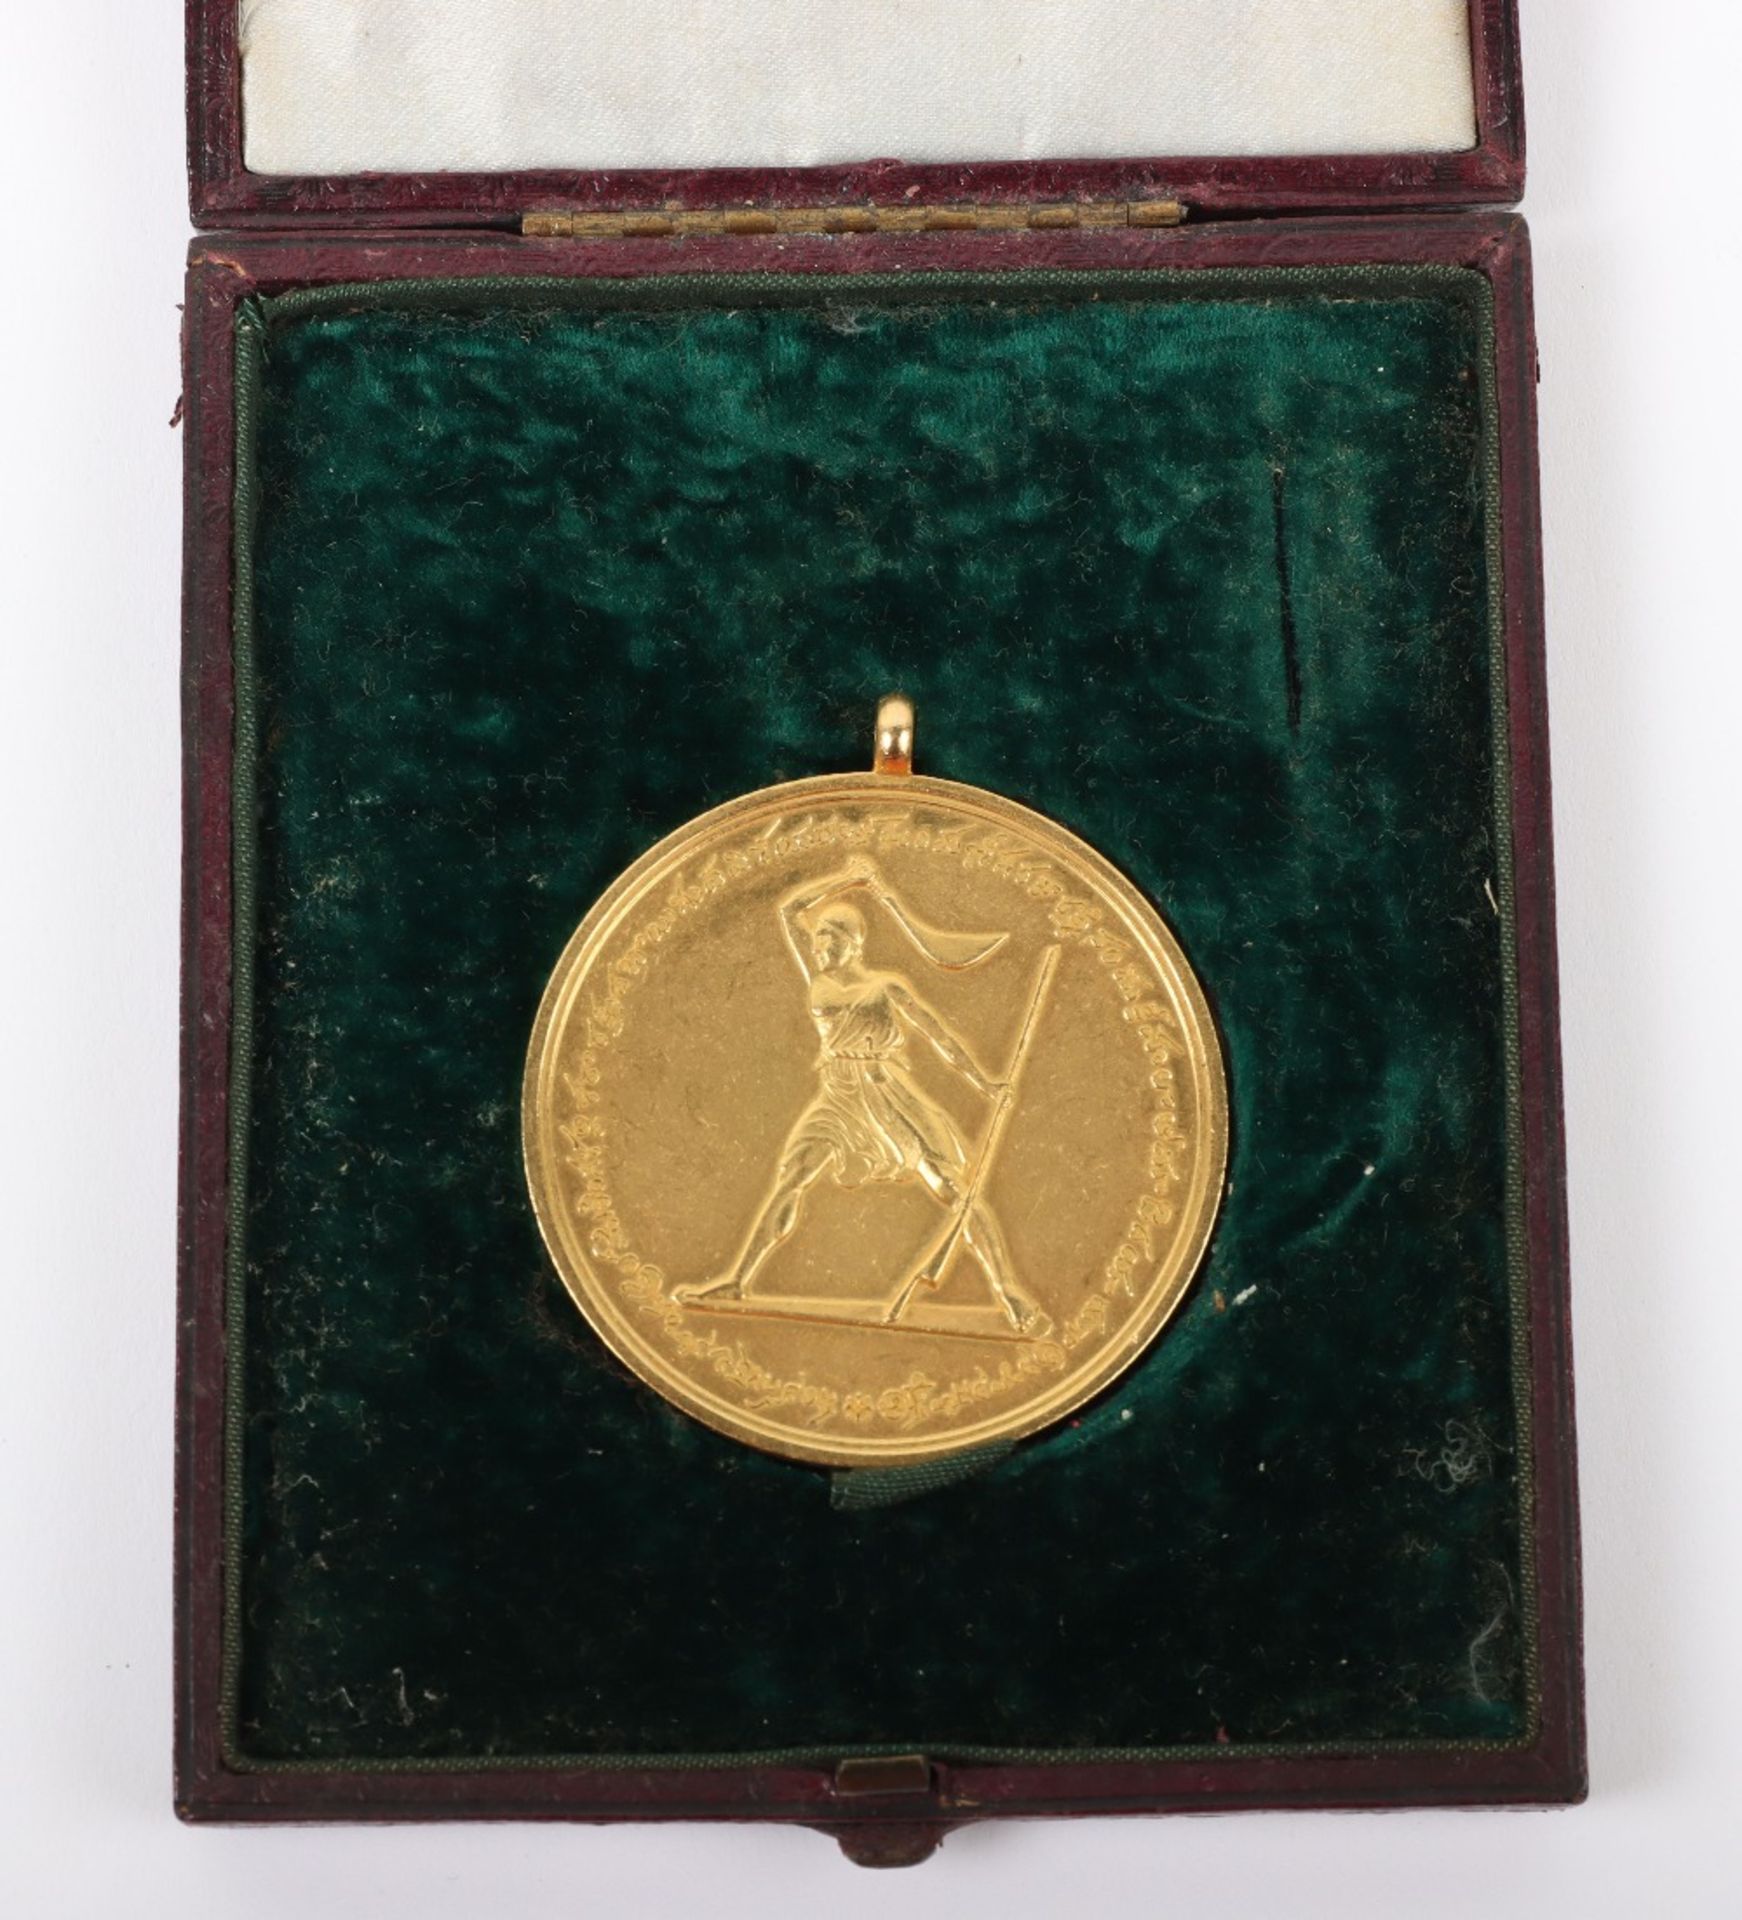 Rare Honourable East India Company Medal for the Coorg Rebellion 1837, 3rd Class Gold Medal (4 Tolas - Image 5 of 5